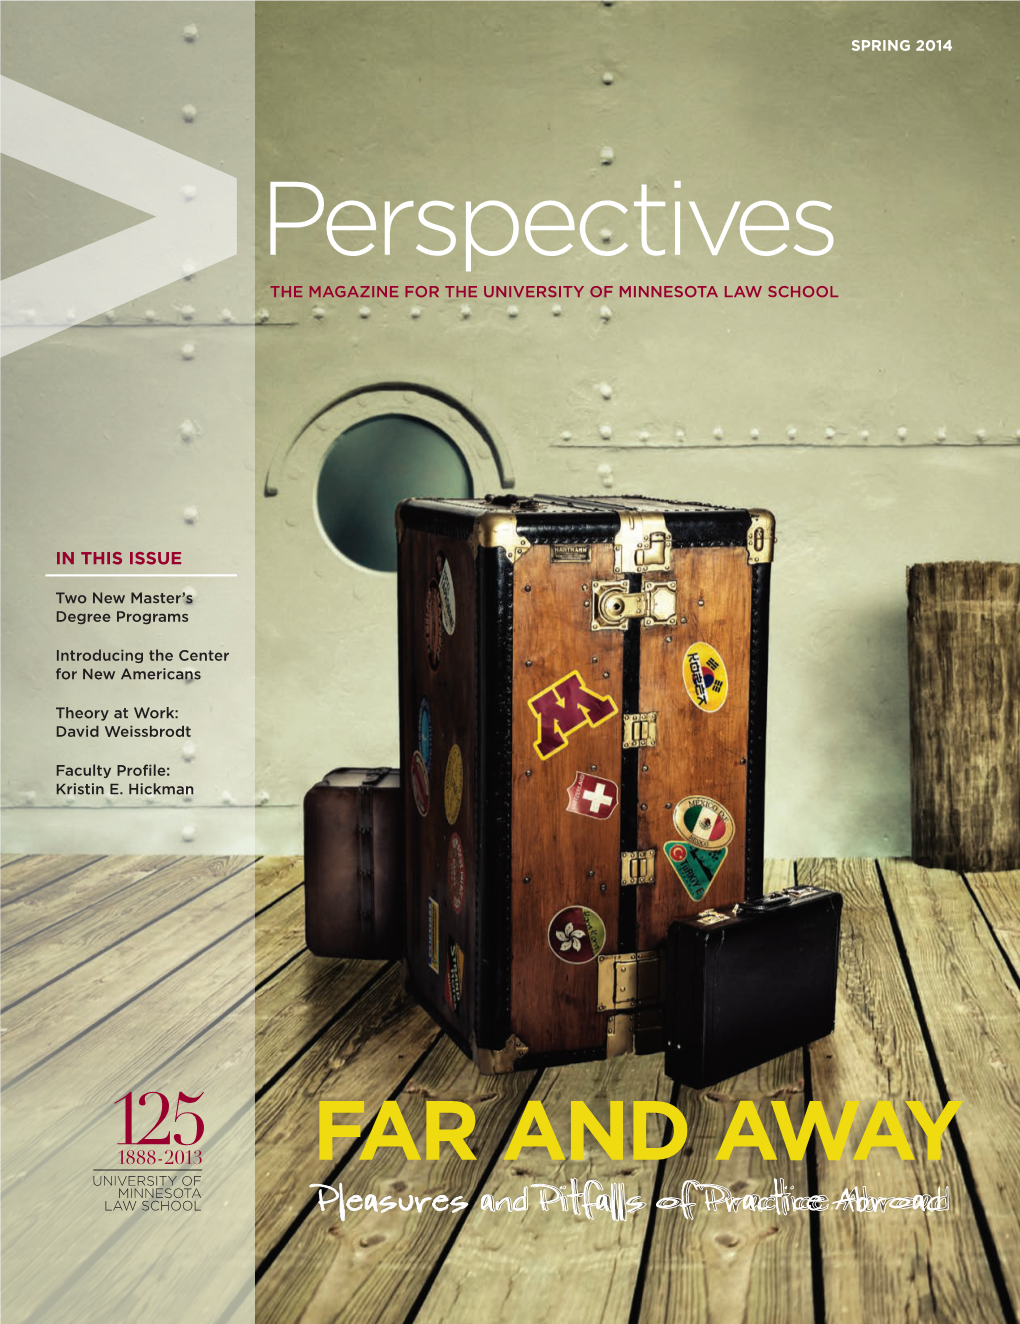 Perspectives the MAGAZINE for the UNIVERSITY of MINNESOTA LAW SCHOOL PERSPECTIVES the MAGAZINE for the UNIVERSITY of MINNESOTA LAW SCHOOL